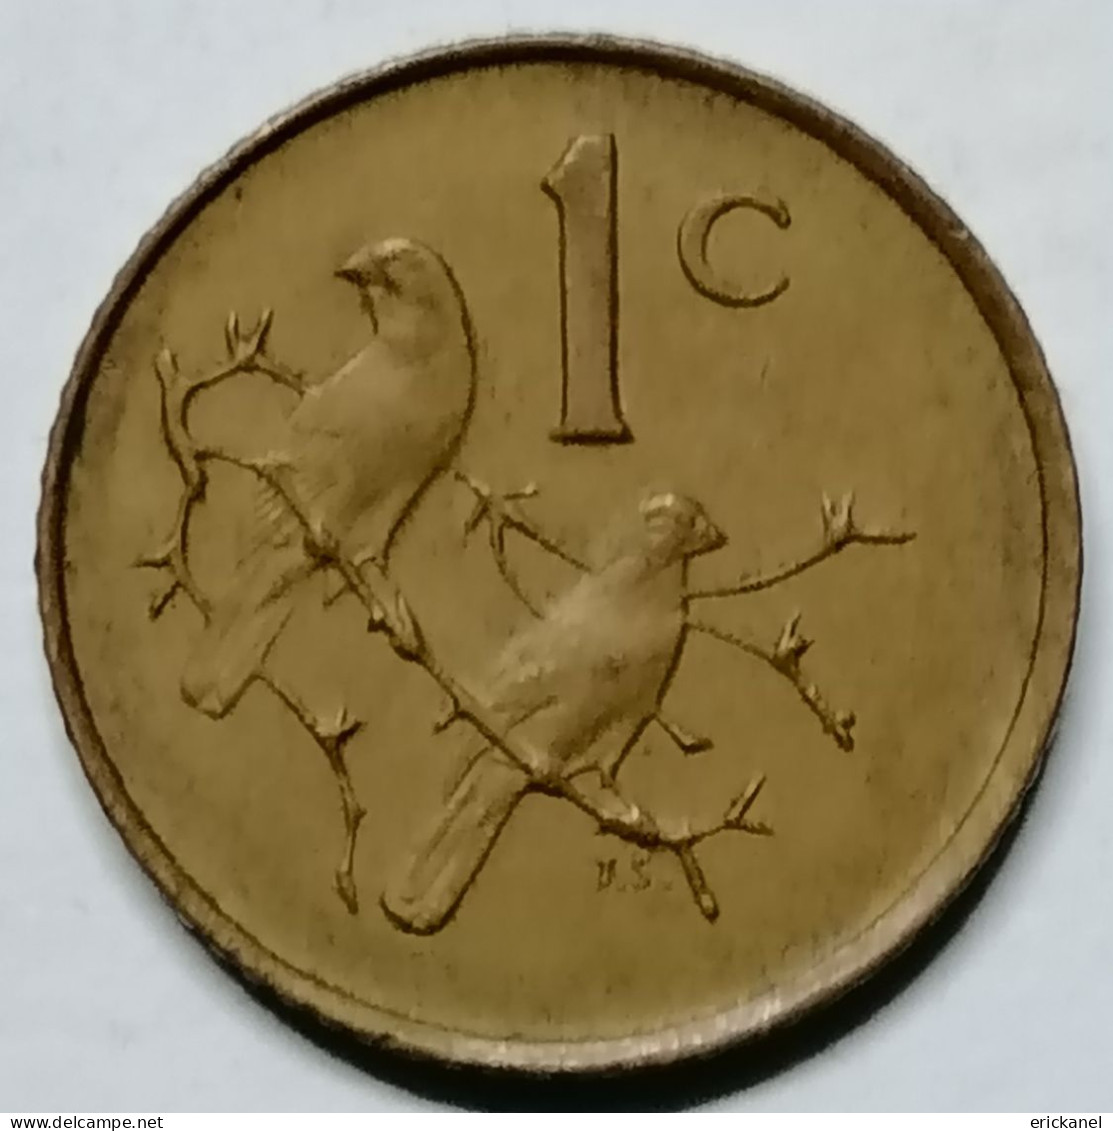 SOUTH AFRICA 1986 1 CENT - South Africa